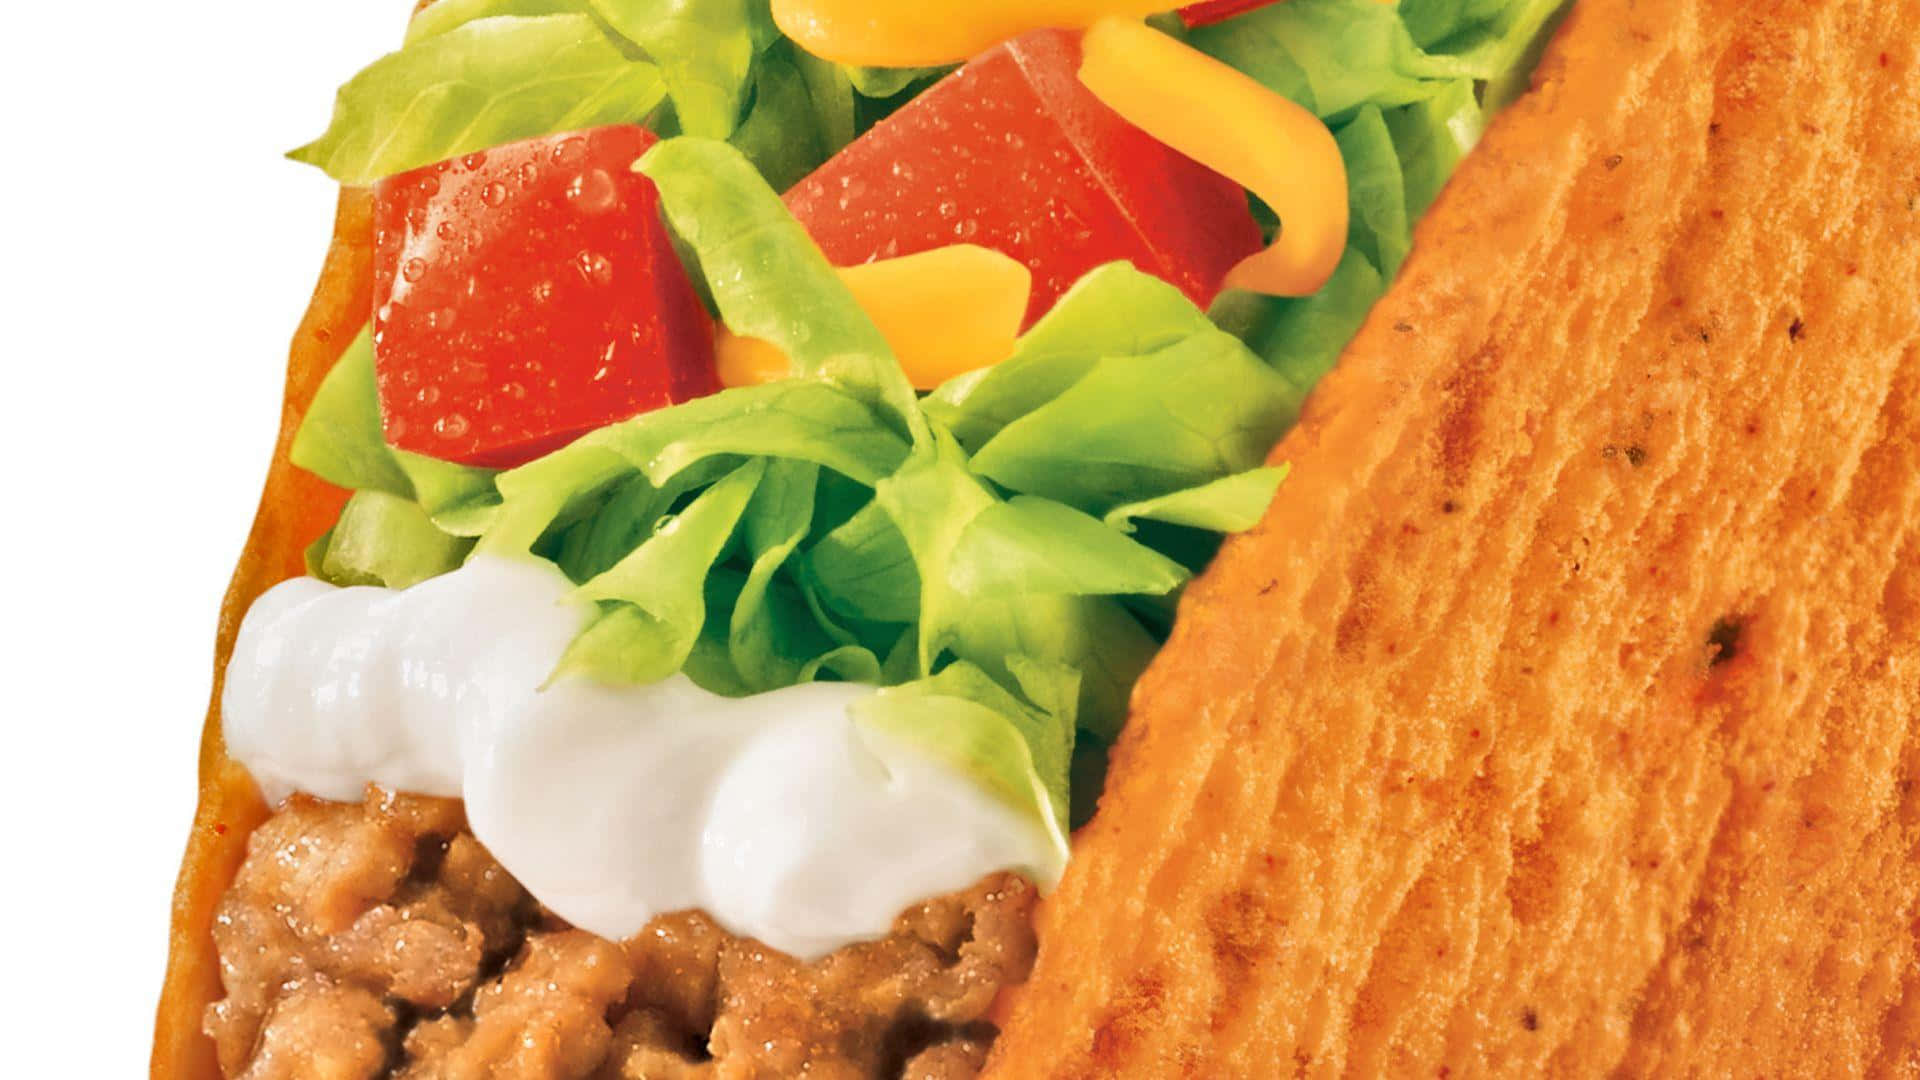 Delicious and Flavorful Taco - The Perfect Mid-Day Meal!